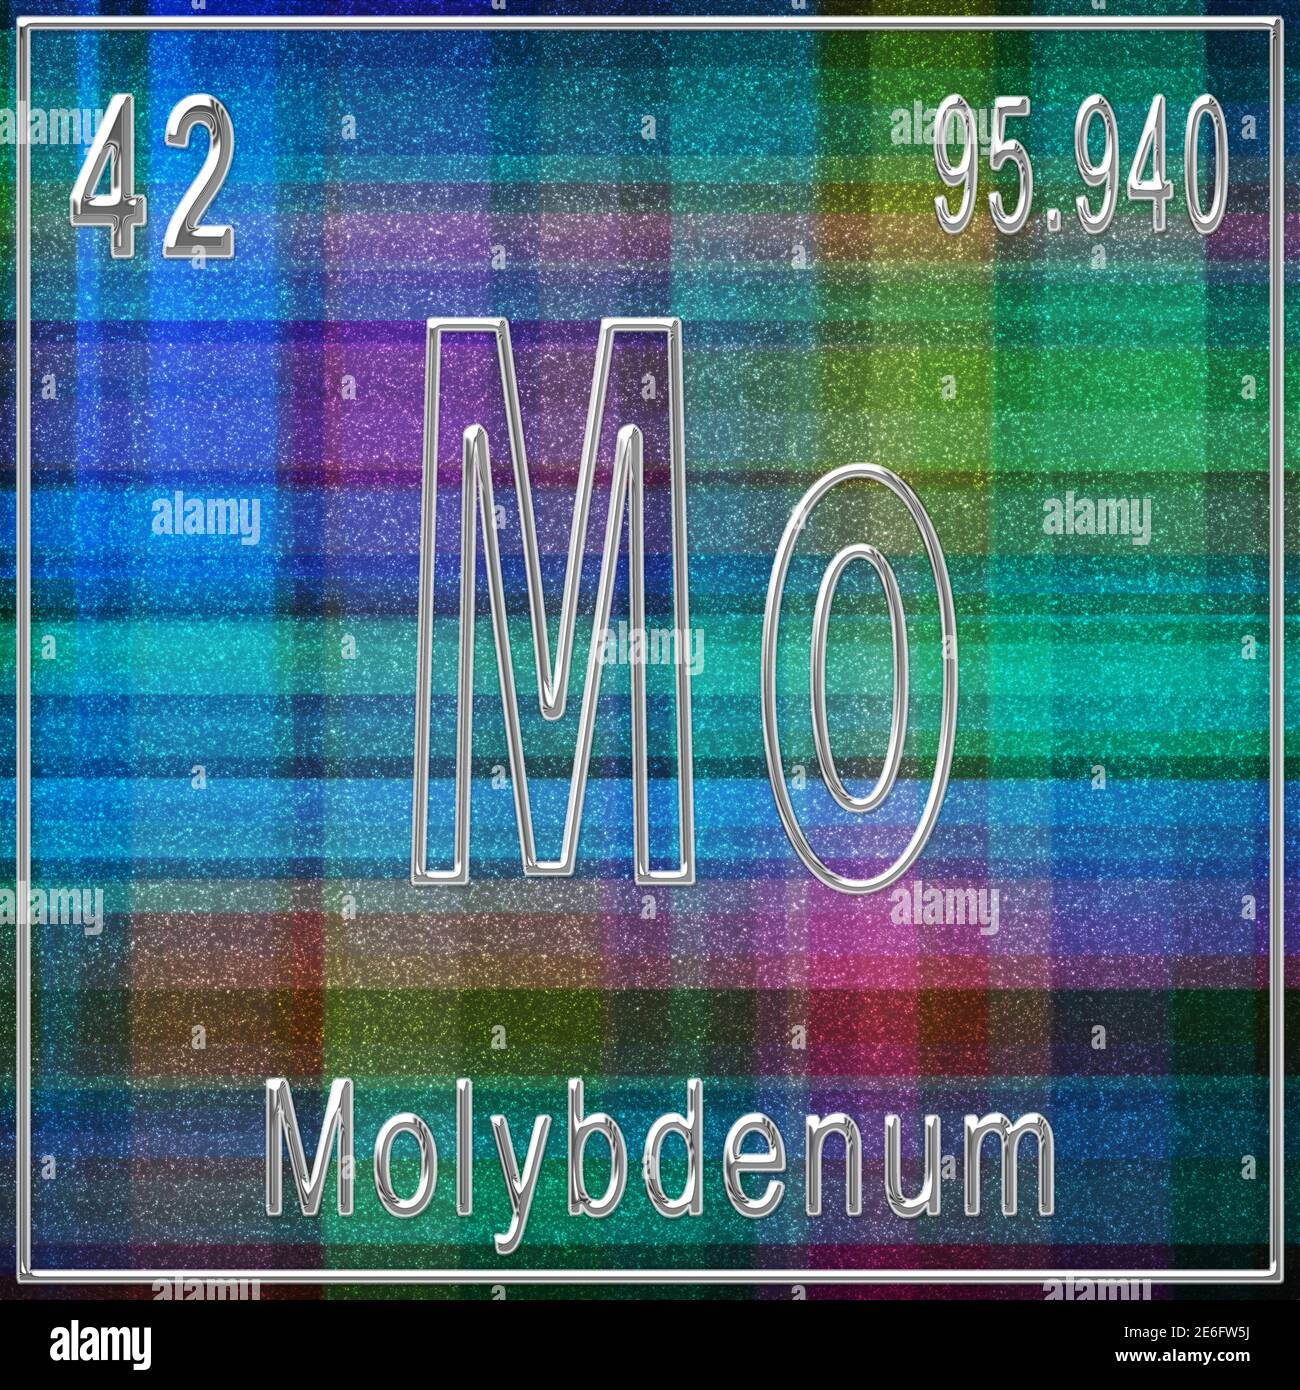 Molybdenum chemical element, Sign with atomic number and atomic weight, Periodic Table Element Stock Photo